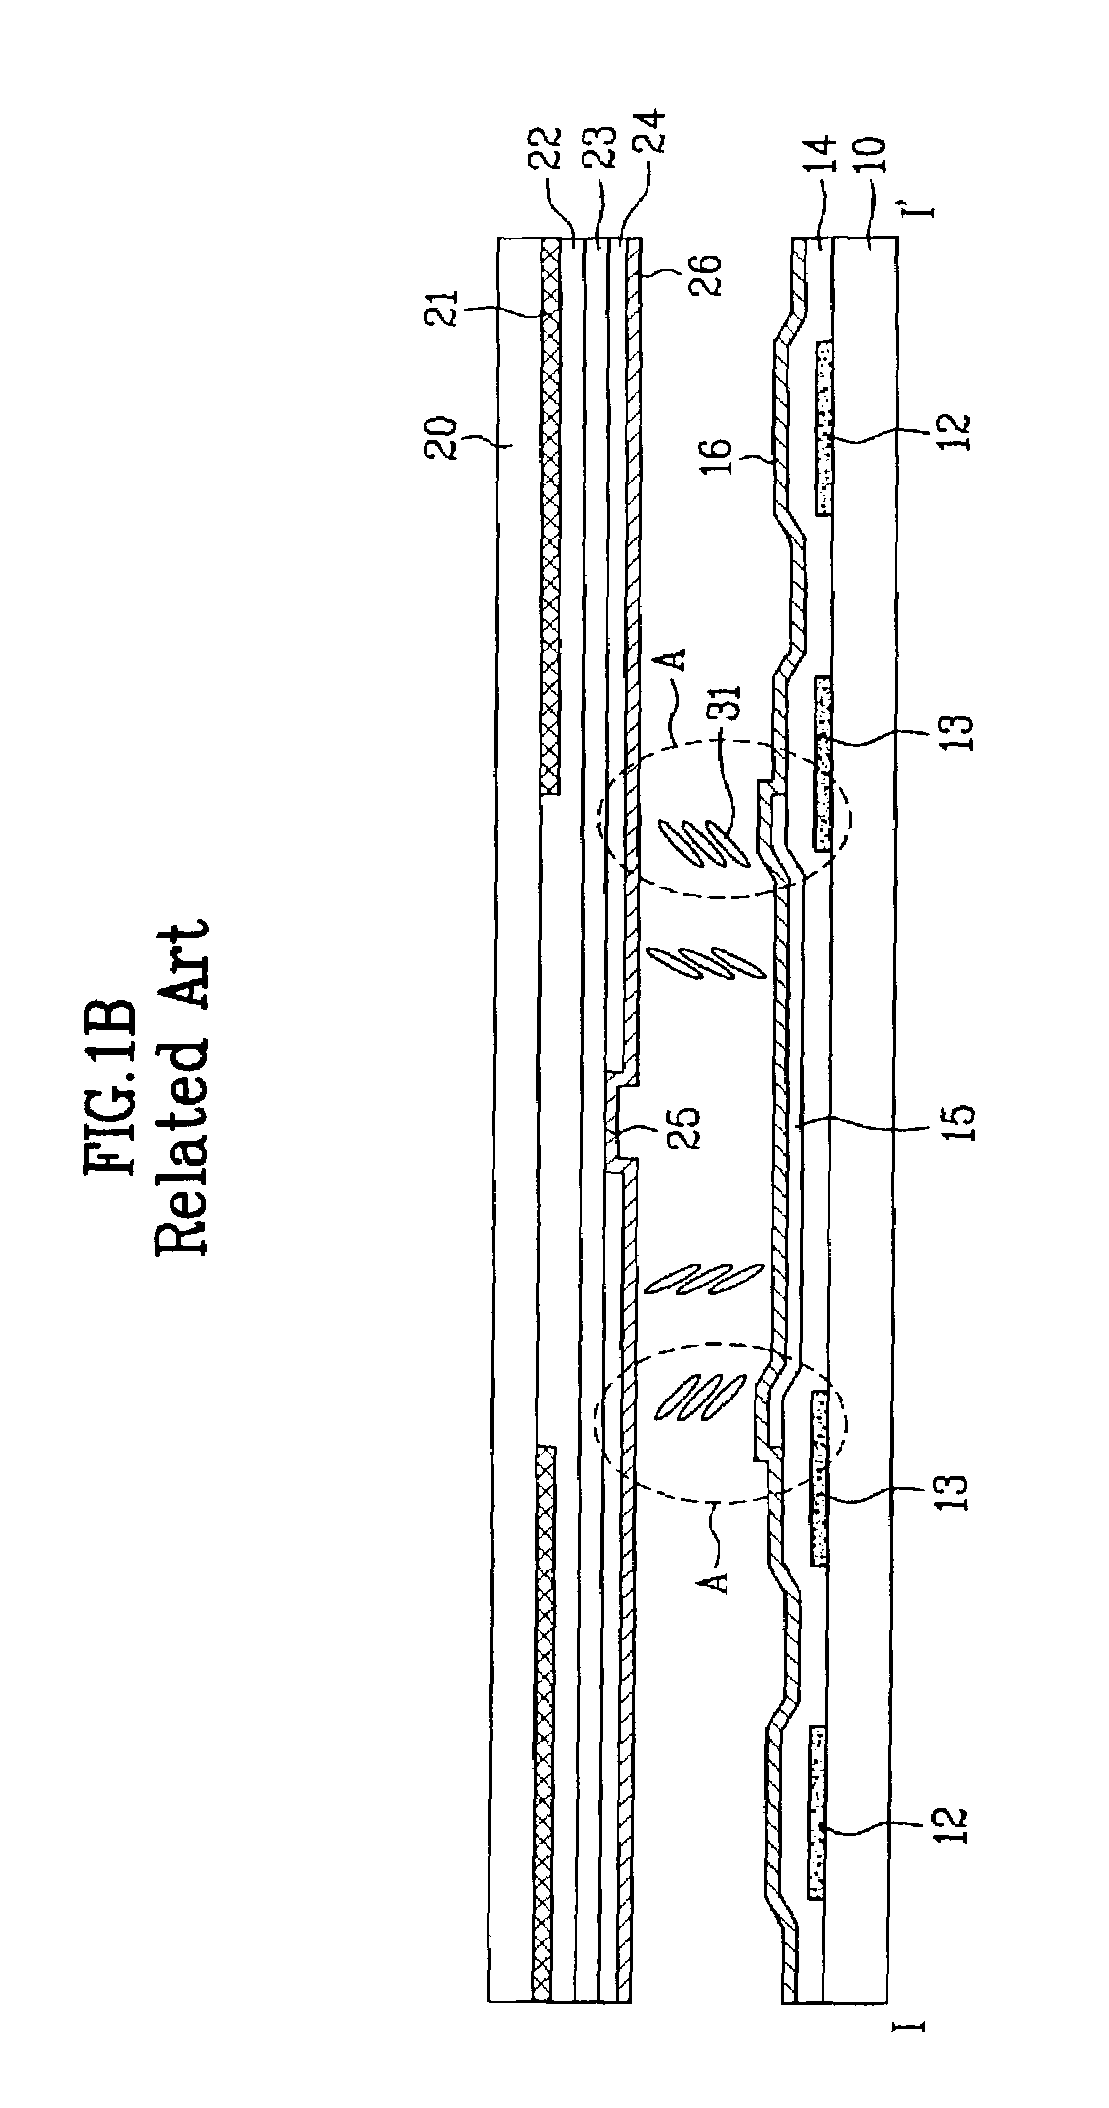 Liquid crystal display device having an auxiliary electrode corresponding to the periphery of the pixel electrode in only one of at least two domain